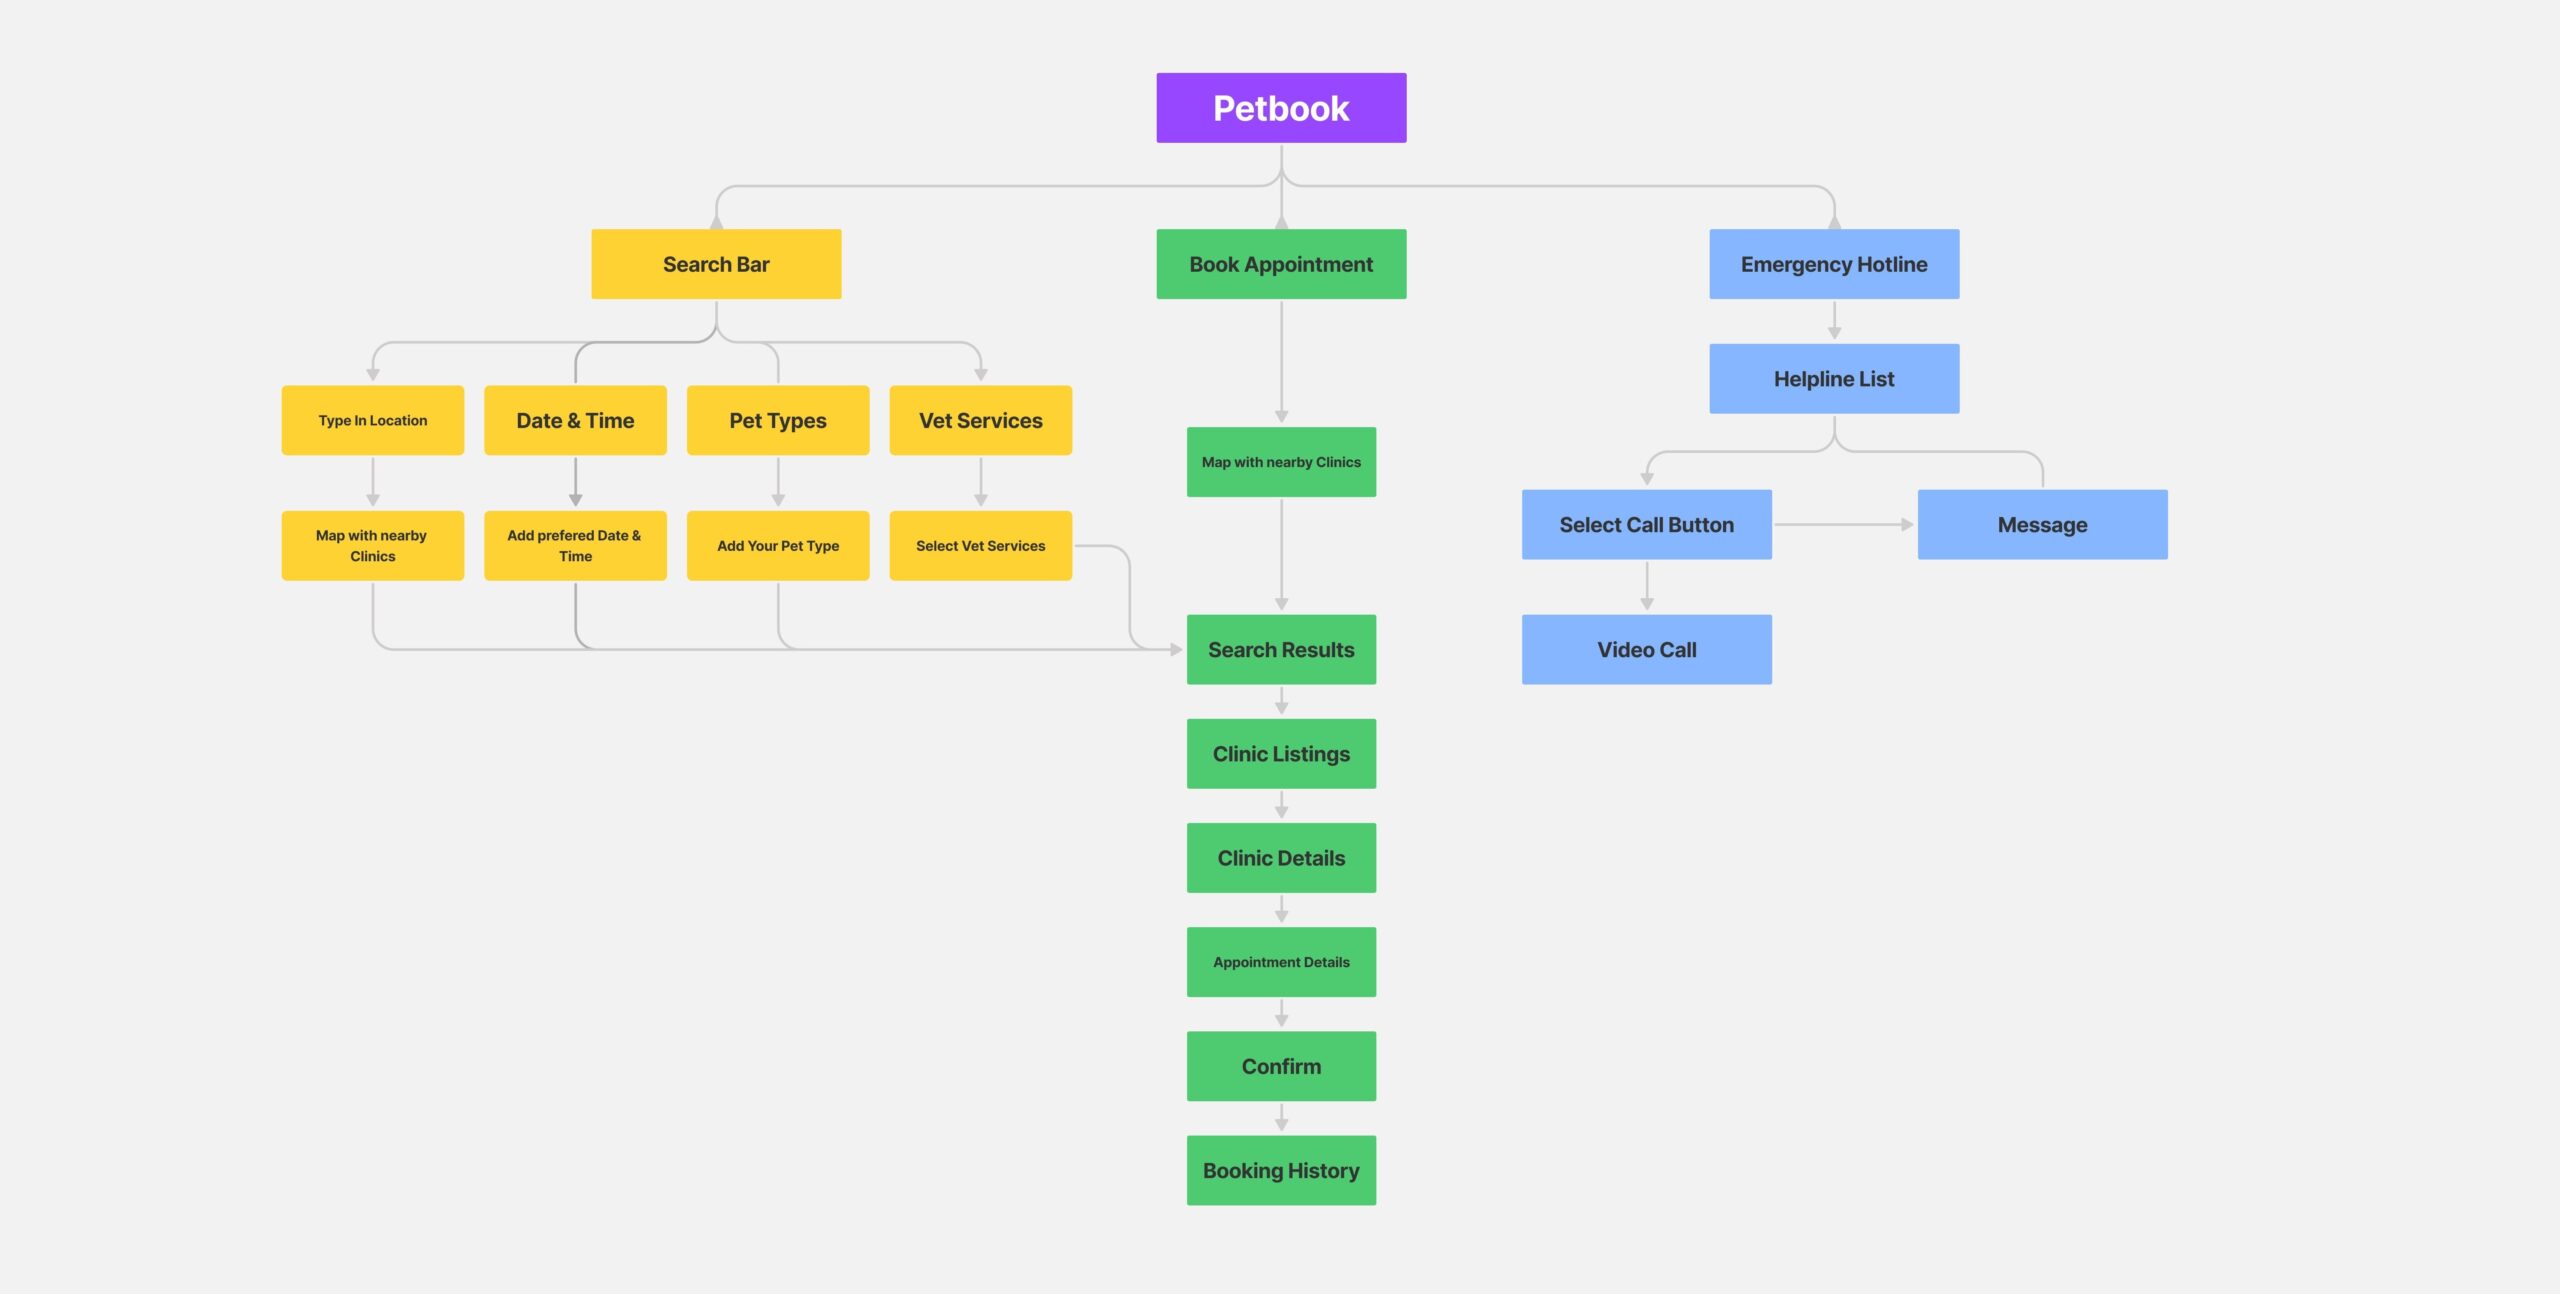 Petbook-Information-Hierarchy-User-Flow-After